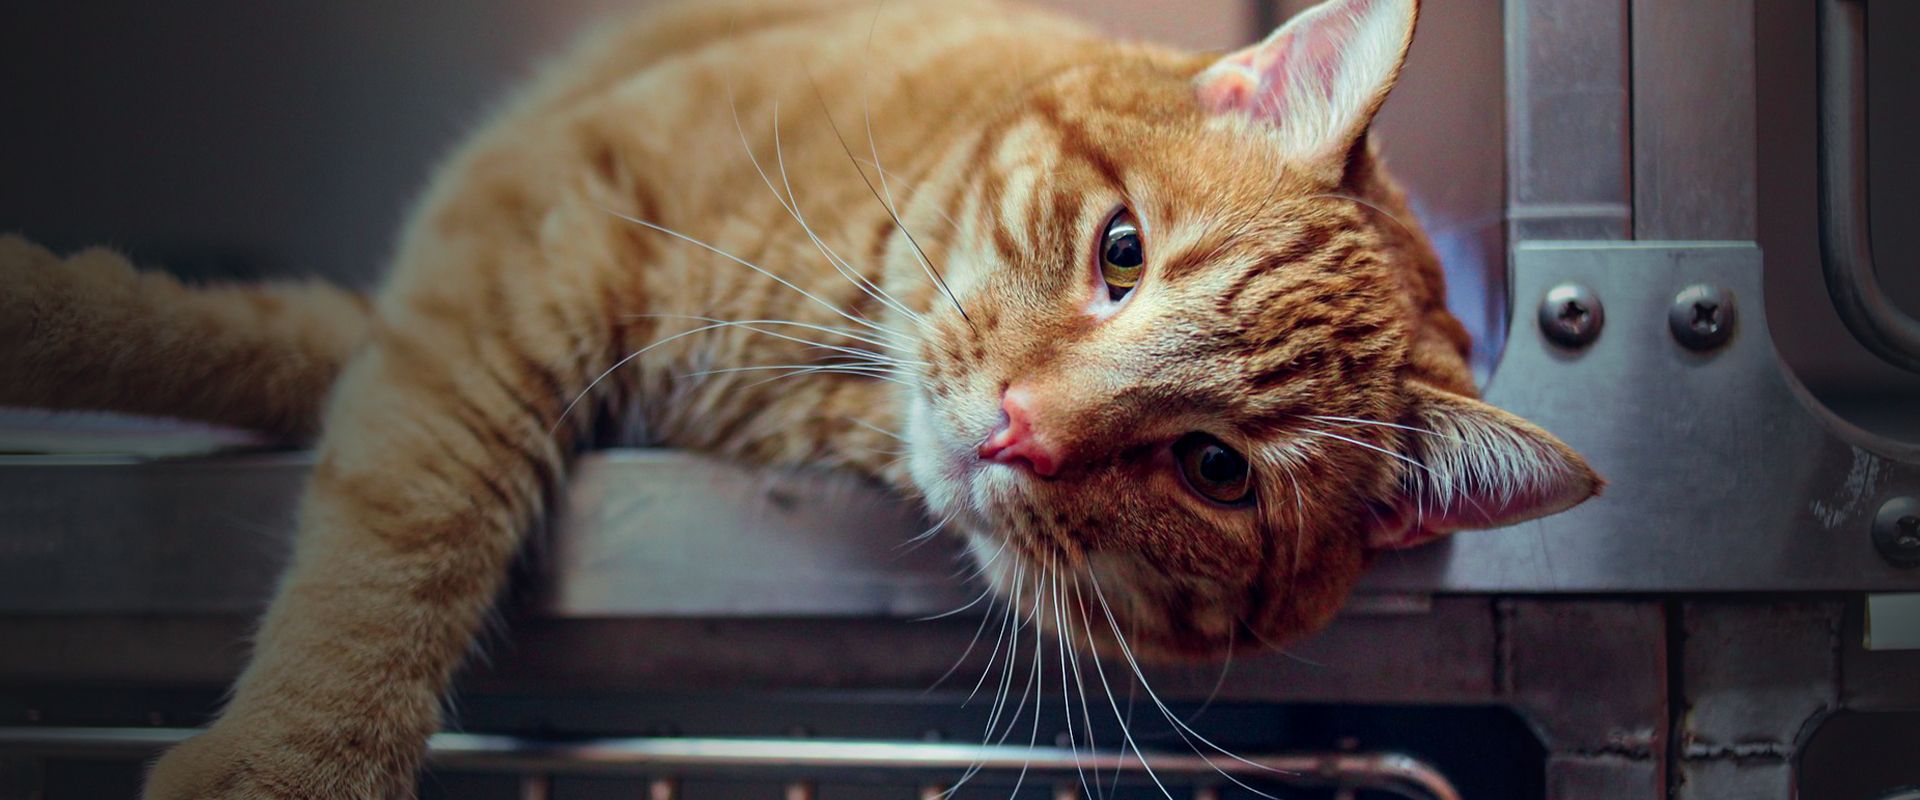 orange striped cat in a cage at a veterinary clinic